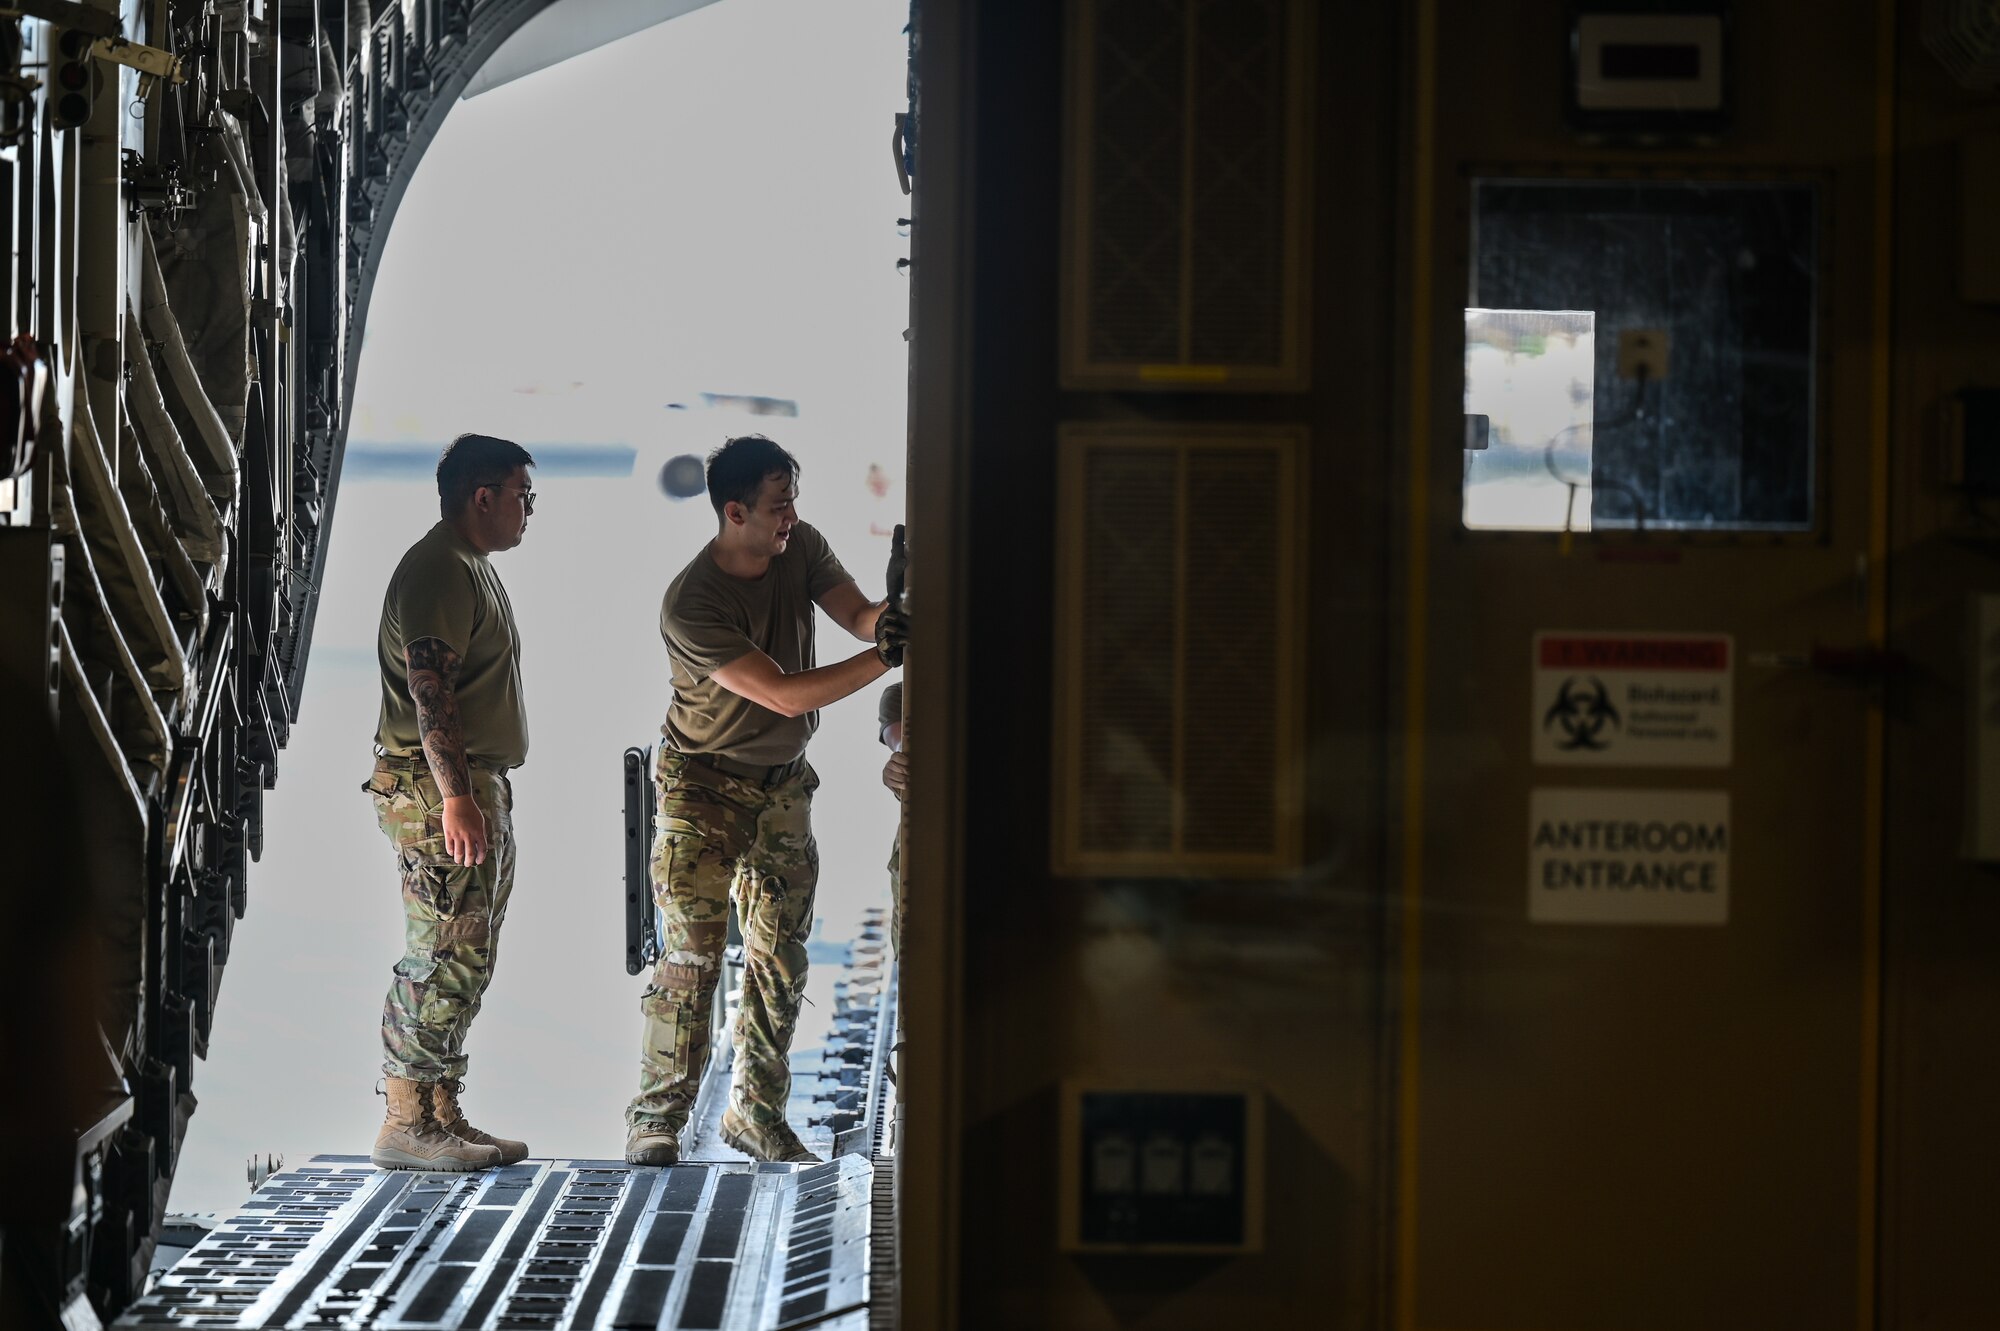 Senior Airman Damian Cavazos, 535th Airlift Squadron loadmaster, and Senior Airman Adrian Jarin, 18th Medical Group public health journeyman, guide a Negative Pressure Conex-Lite onto a C-17 Globemaster III at Joint Base Pearl Harbor-Hickam, Hawaii, Sept. 21, 2022. This was the first time that the NPCL carrying a patient was transferred between aircraft within the U.S. Pacific Air Forces area of responsibility. (U.S. Air Force photo by Staff Sgt. Alan Ricker)